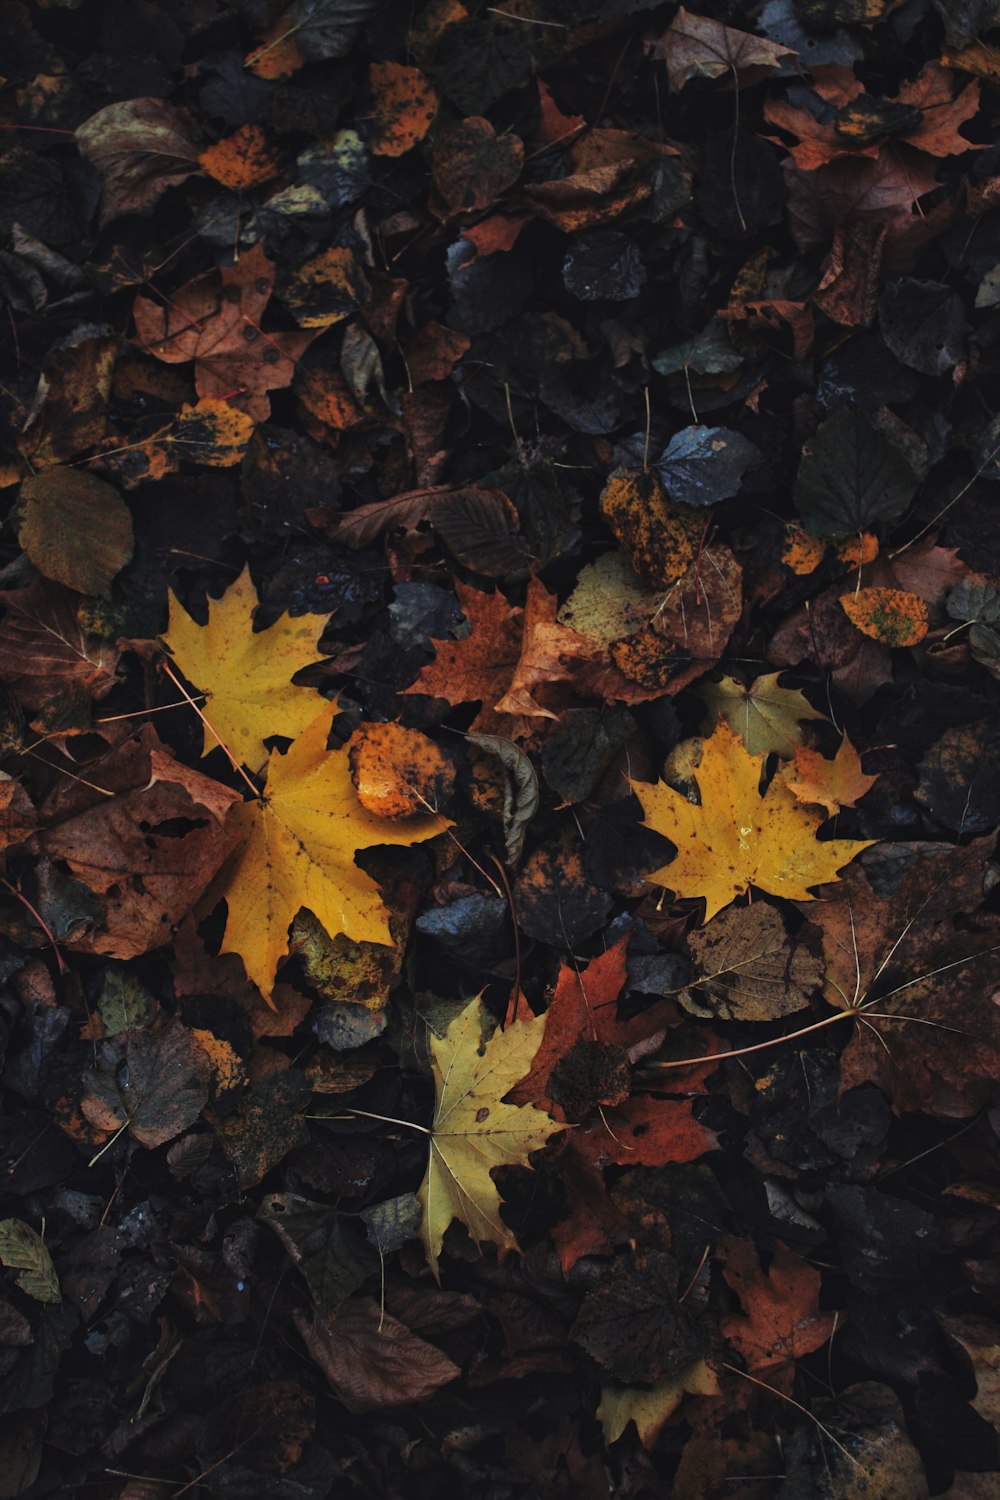 yellow and brown maple leaves on ground